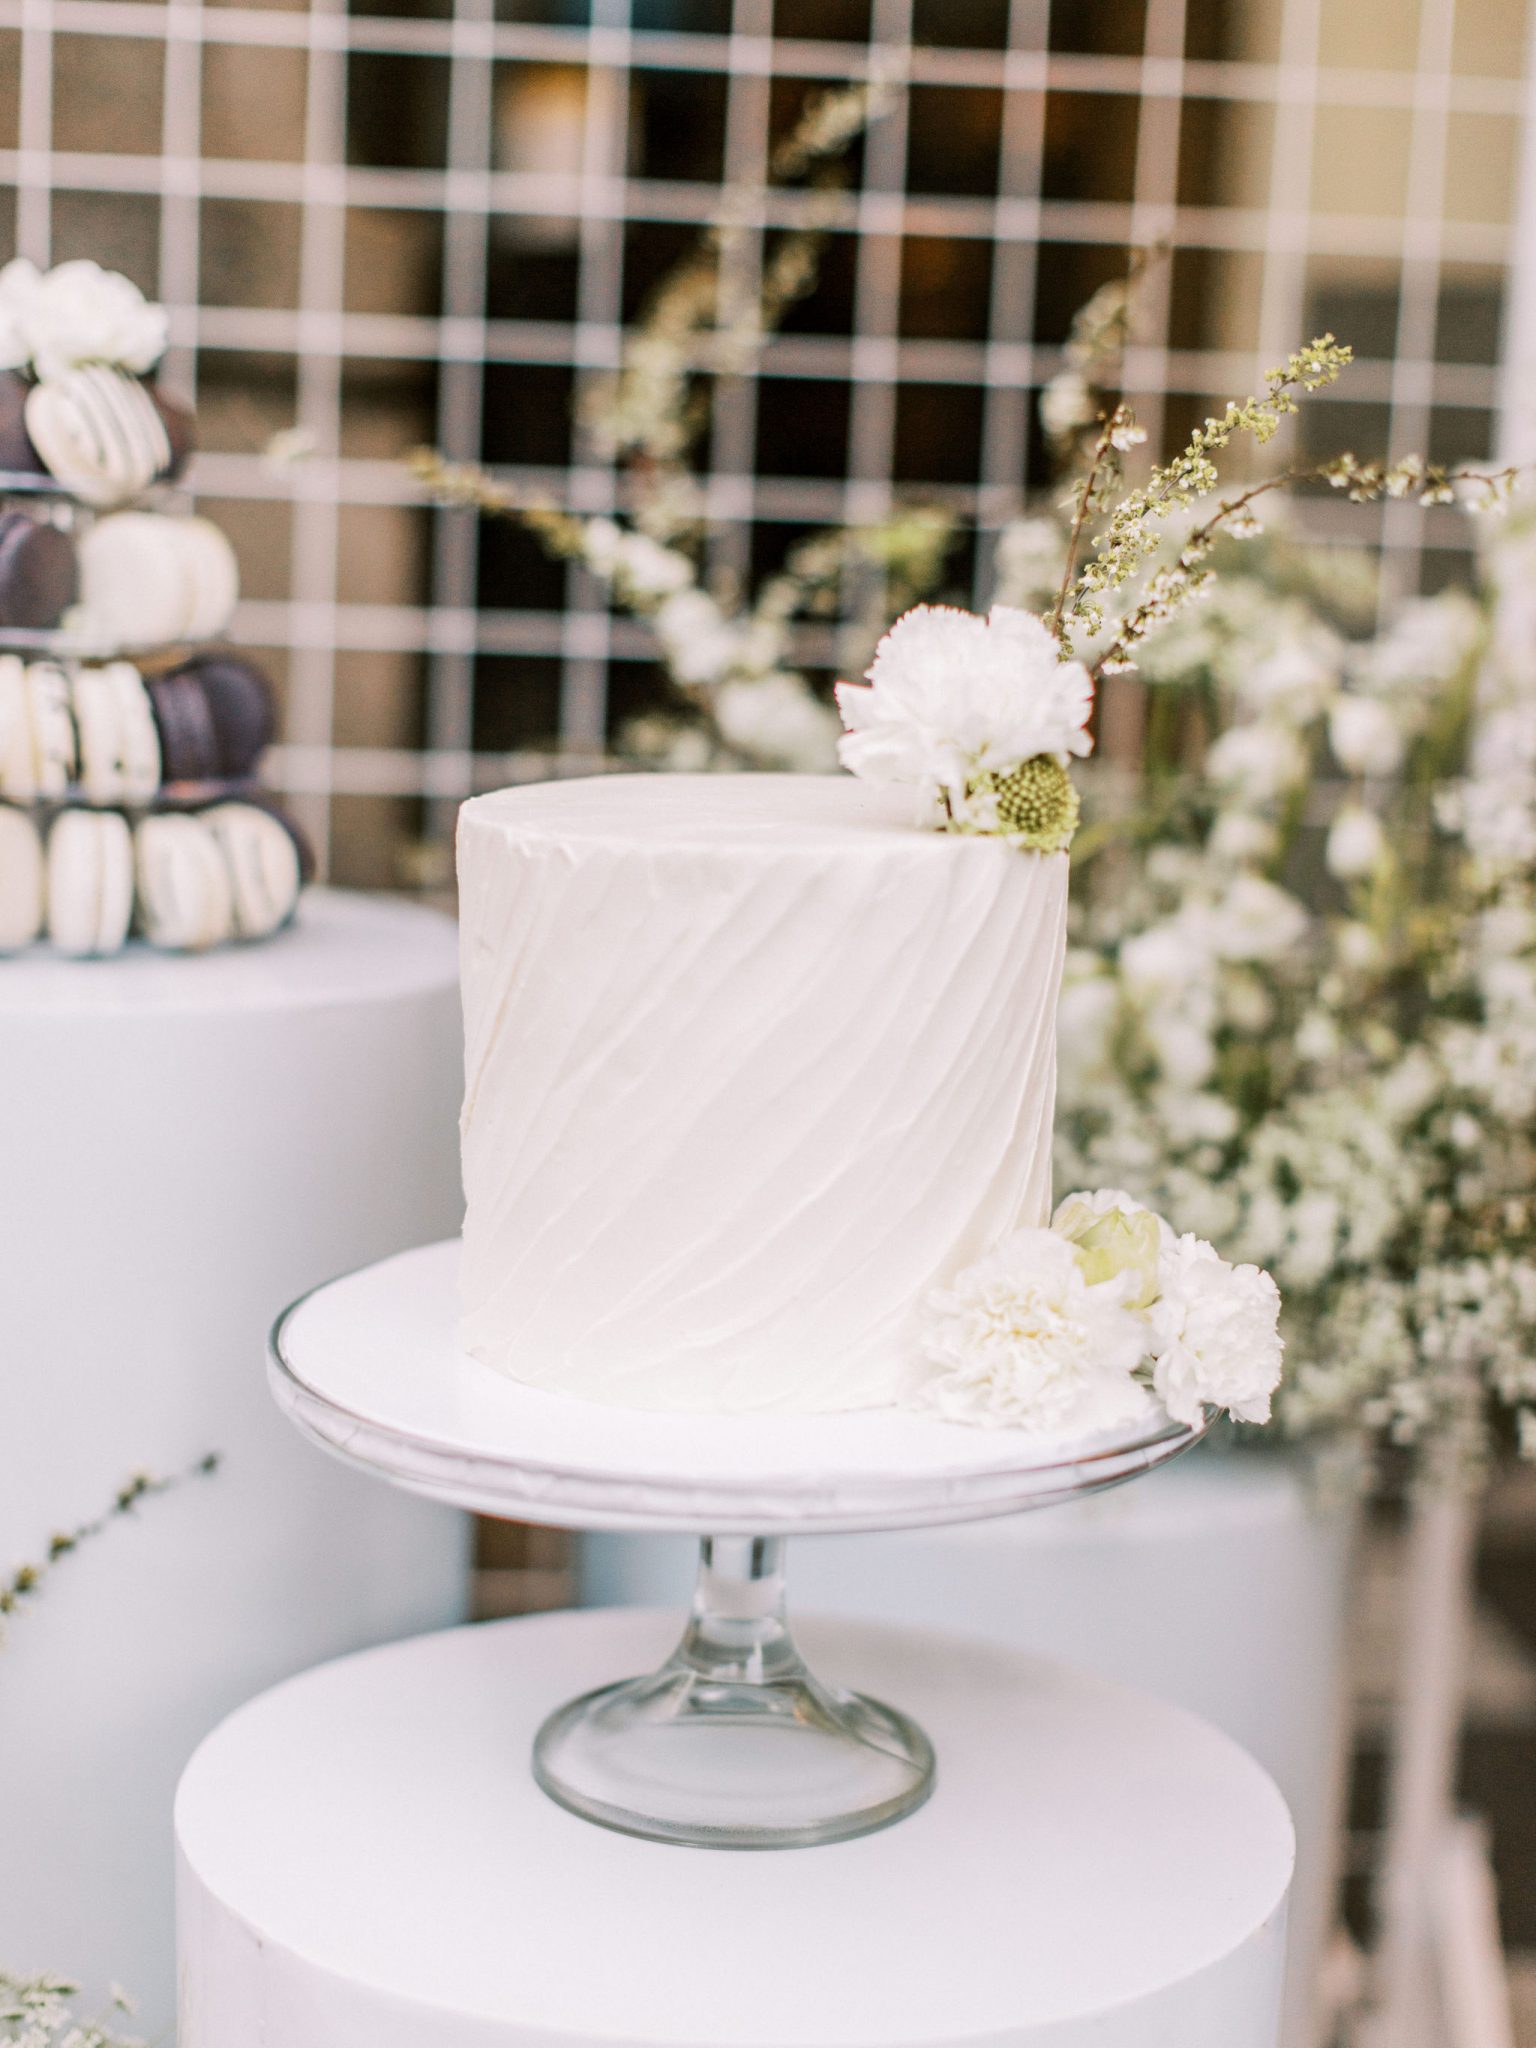 Modern white wedding cake with swirling icing and green flower accents